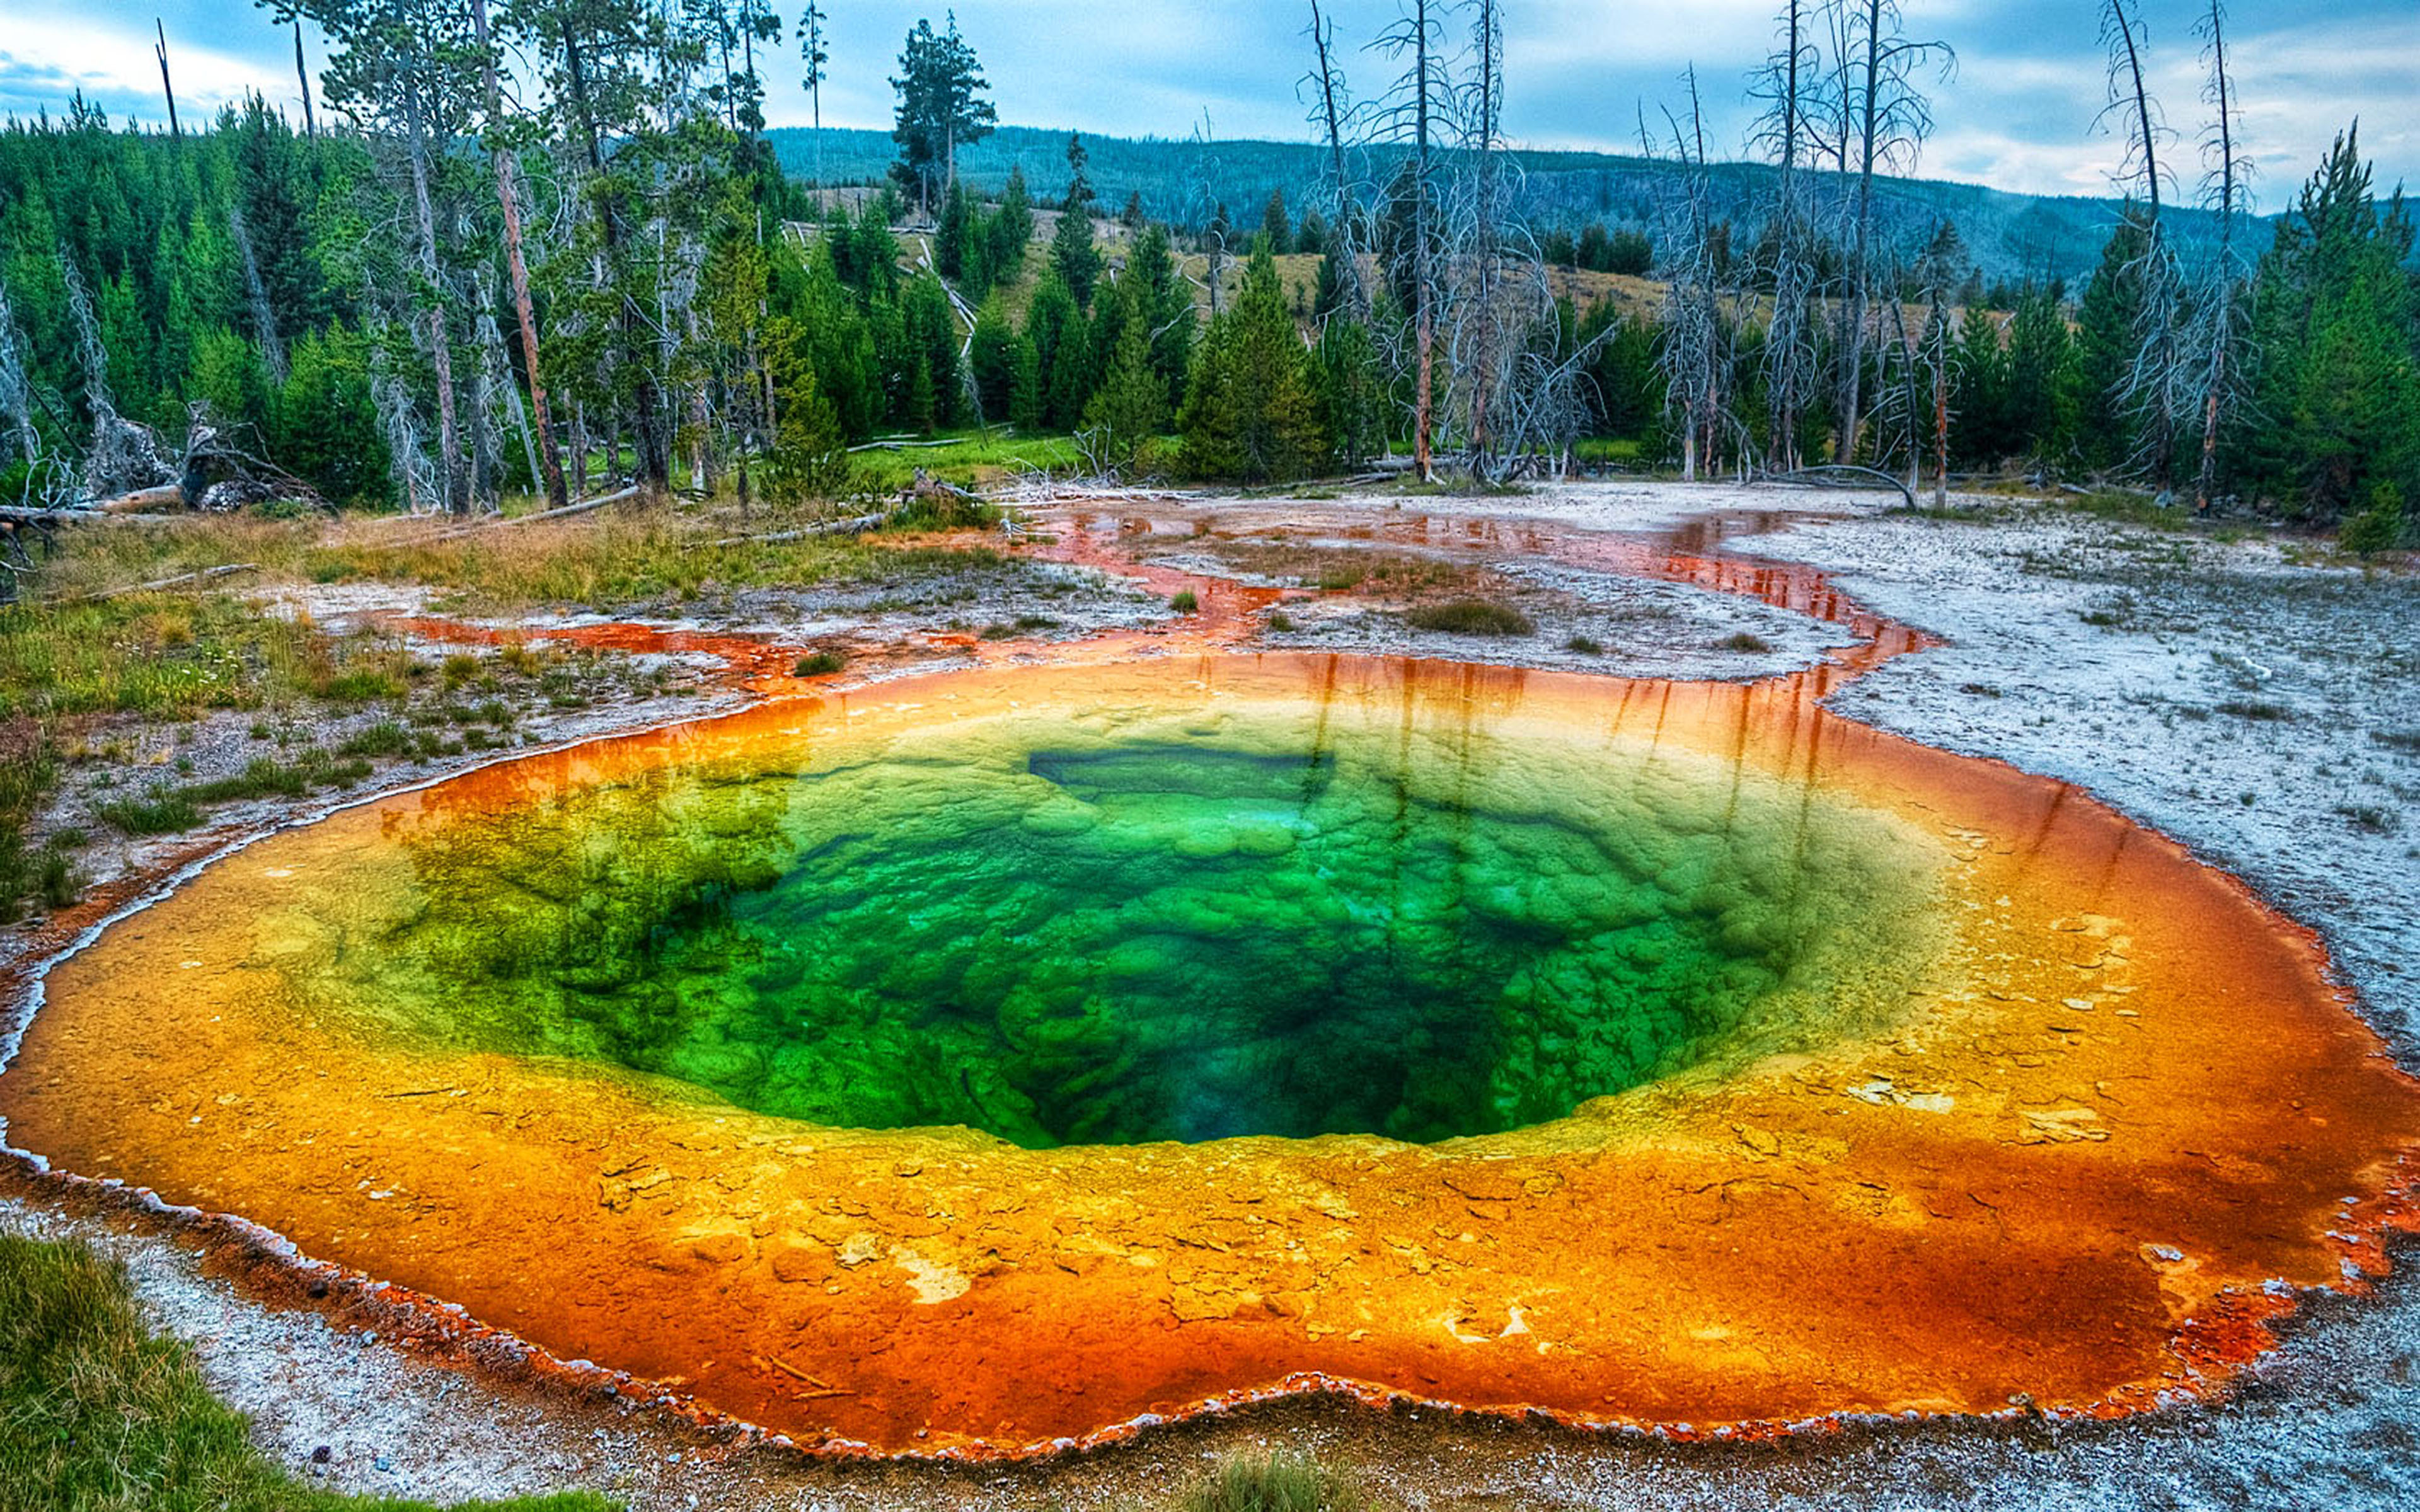 9574 yellowstone national park wallpapers hd